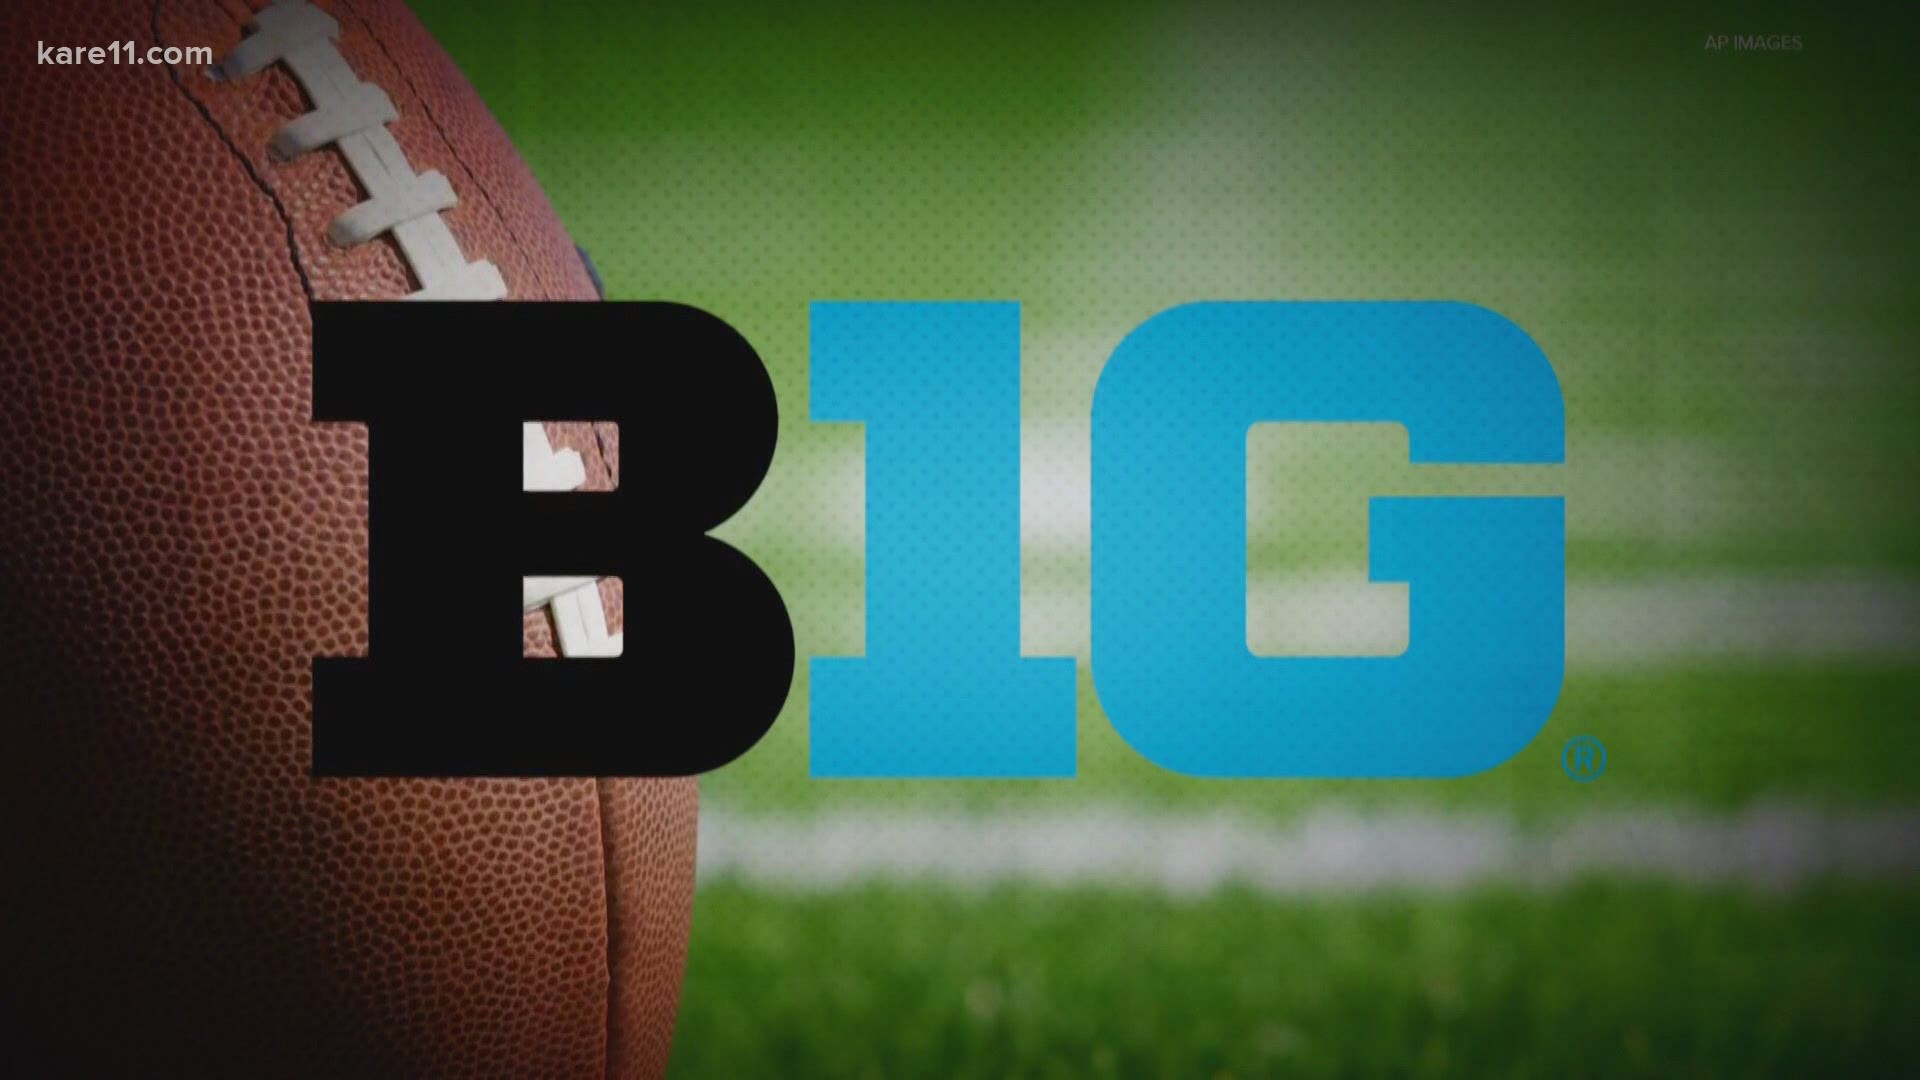 Will they or won't they? Big Ten football continues to discuss the possibility of having a season this year.